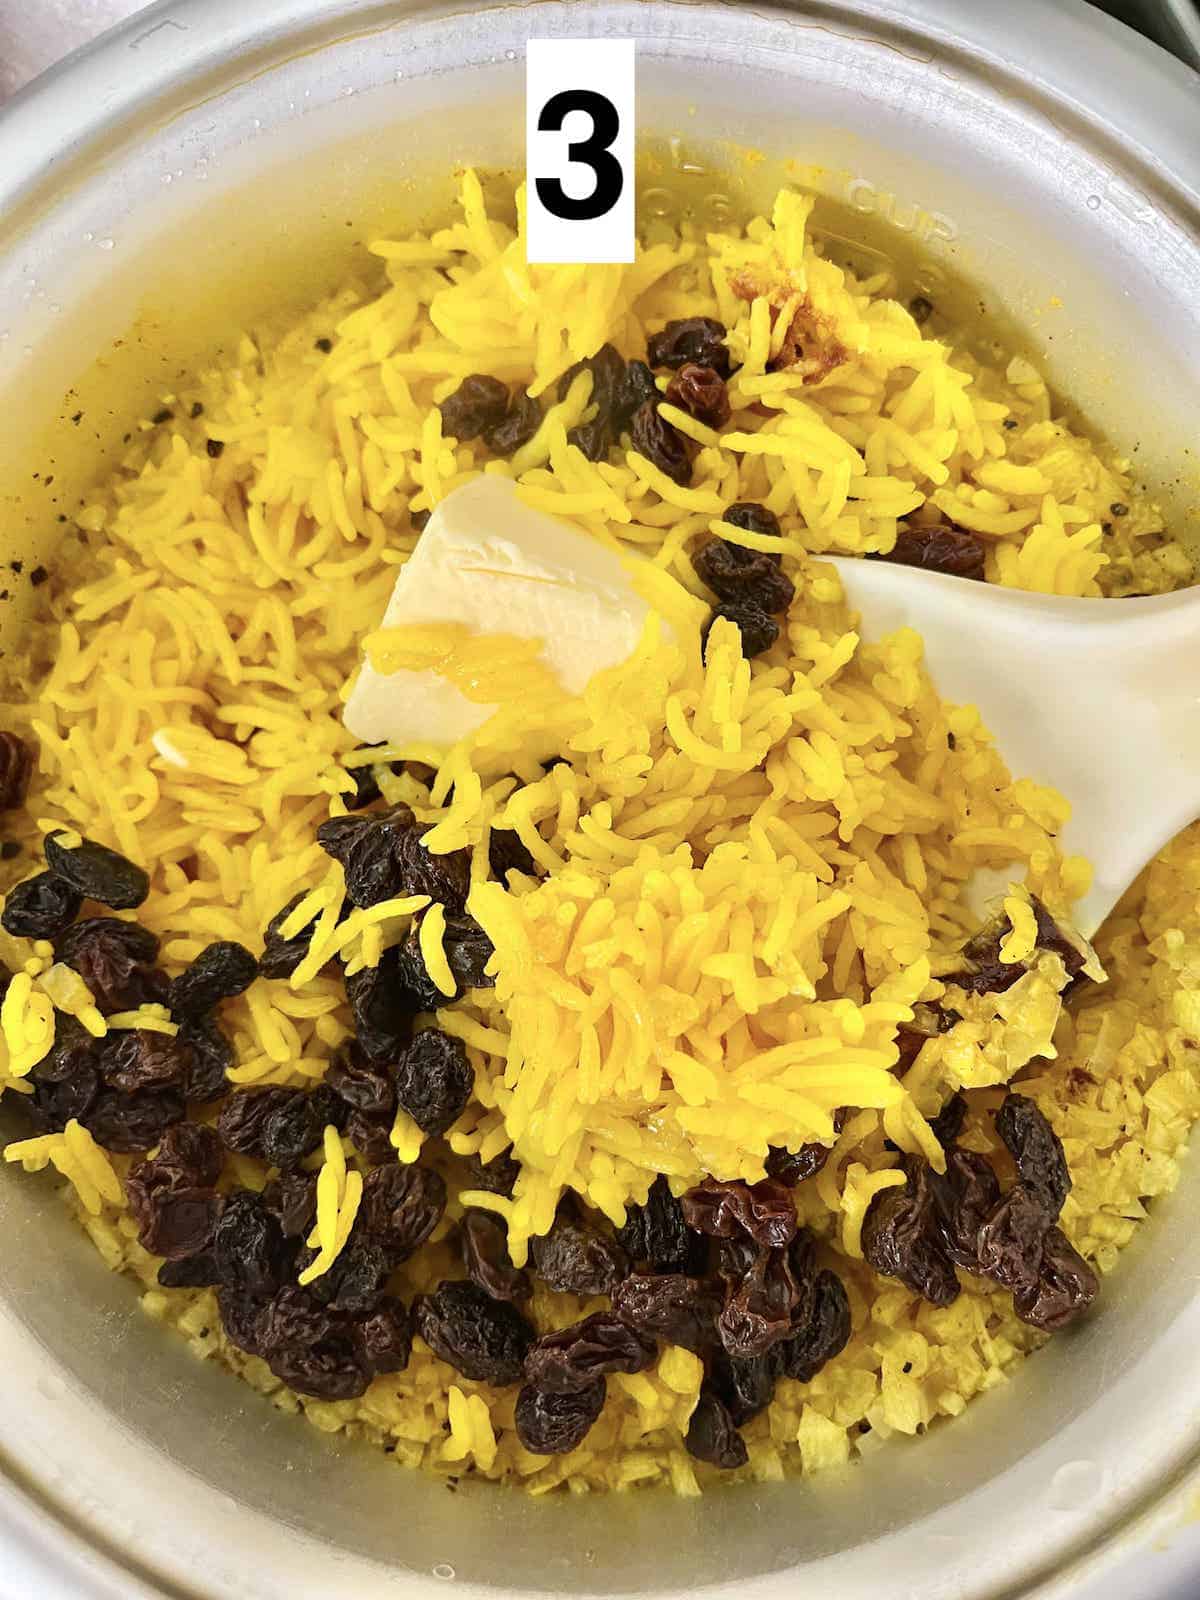 Stirring butter and raisins into golden rice.